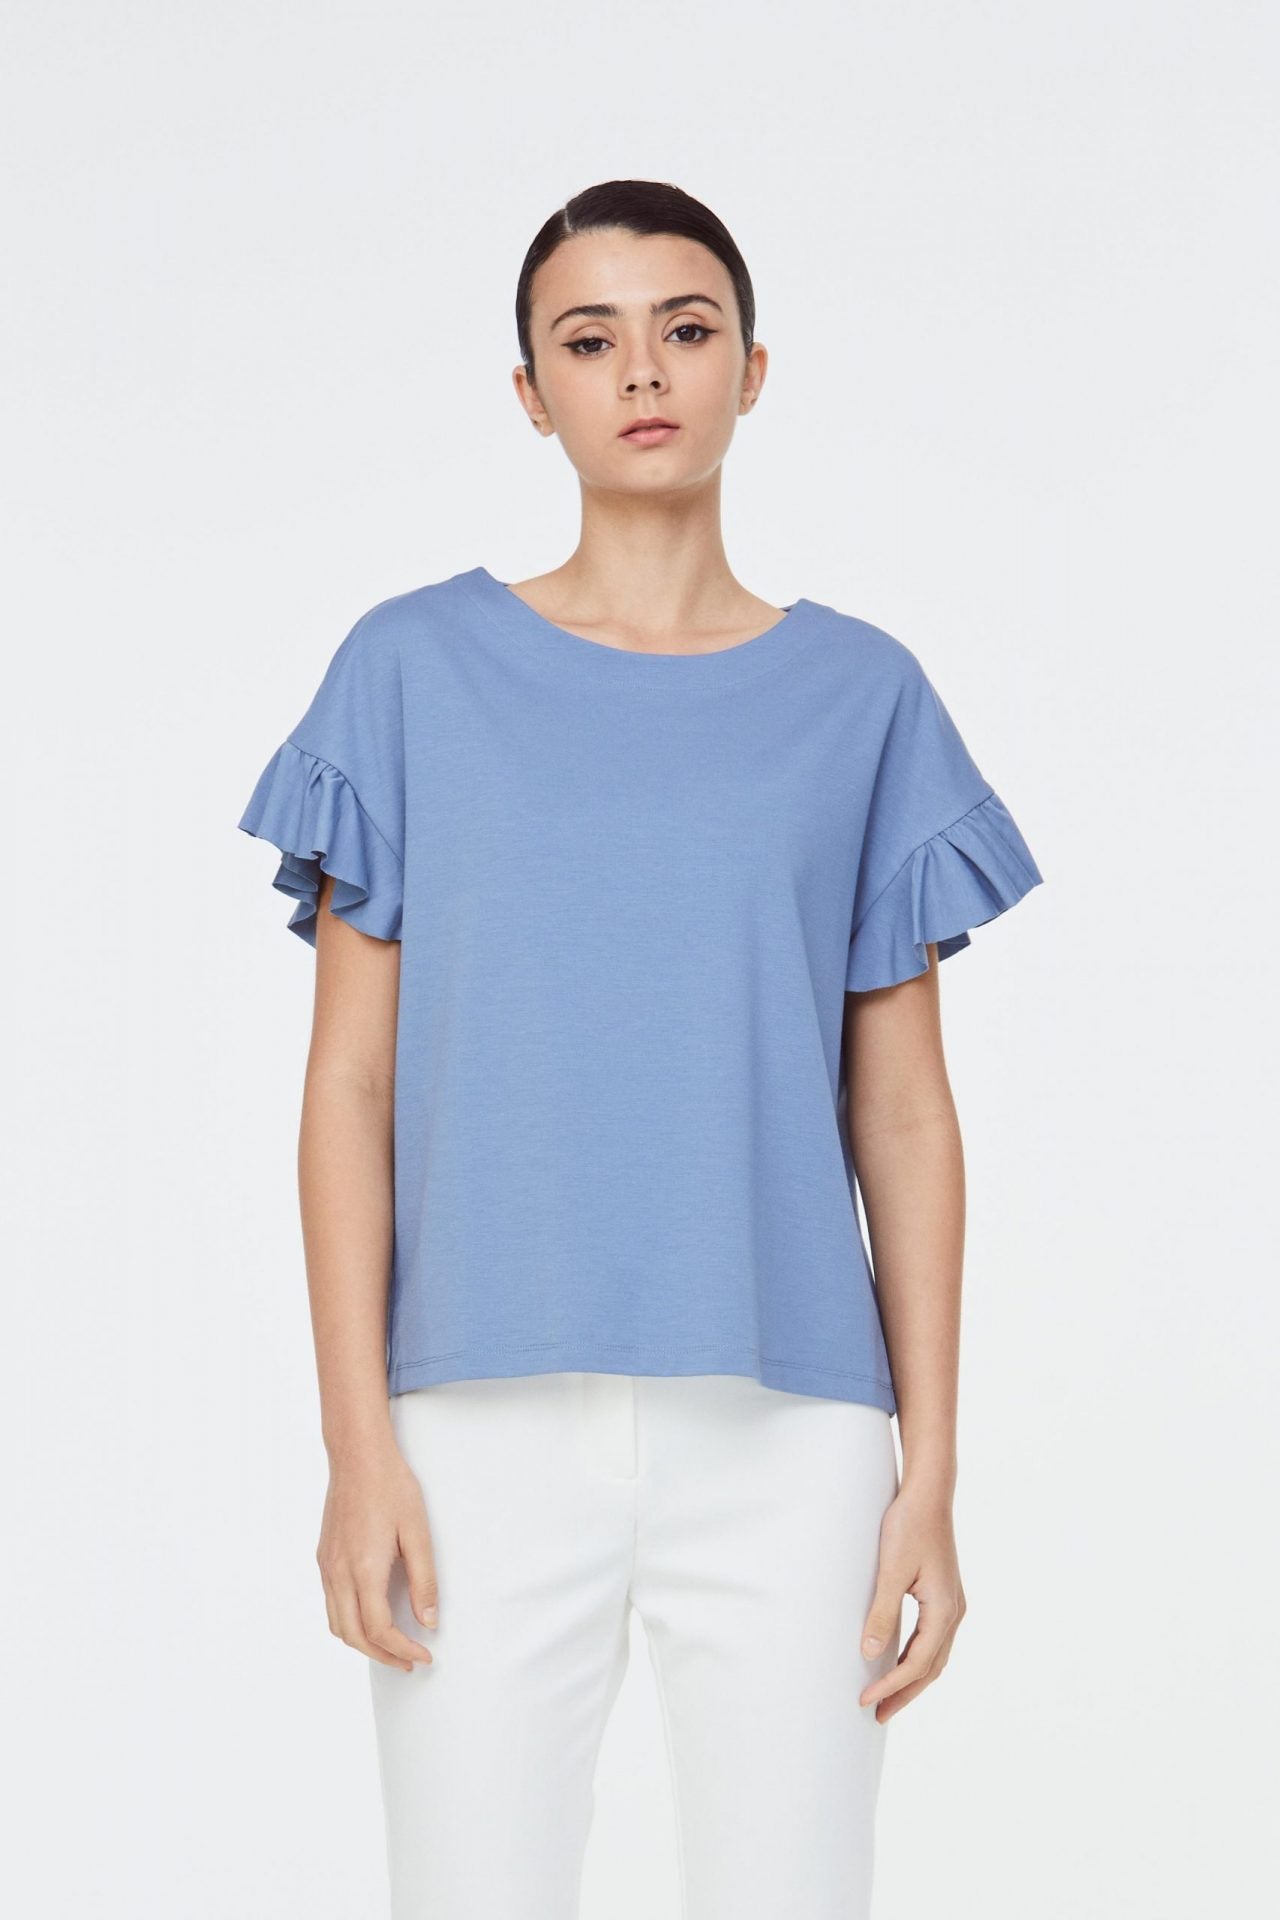 8718 GREY BLUE FRILL SLEEVED TOP